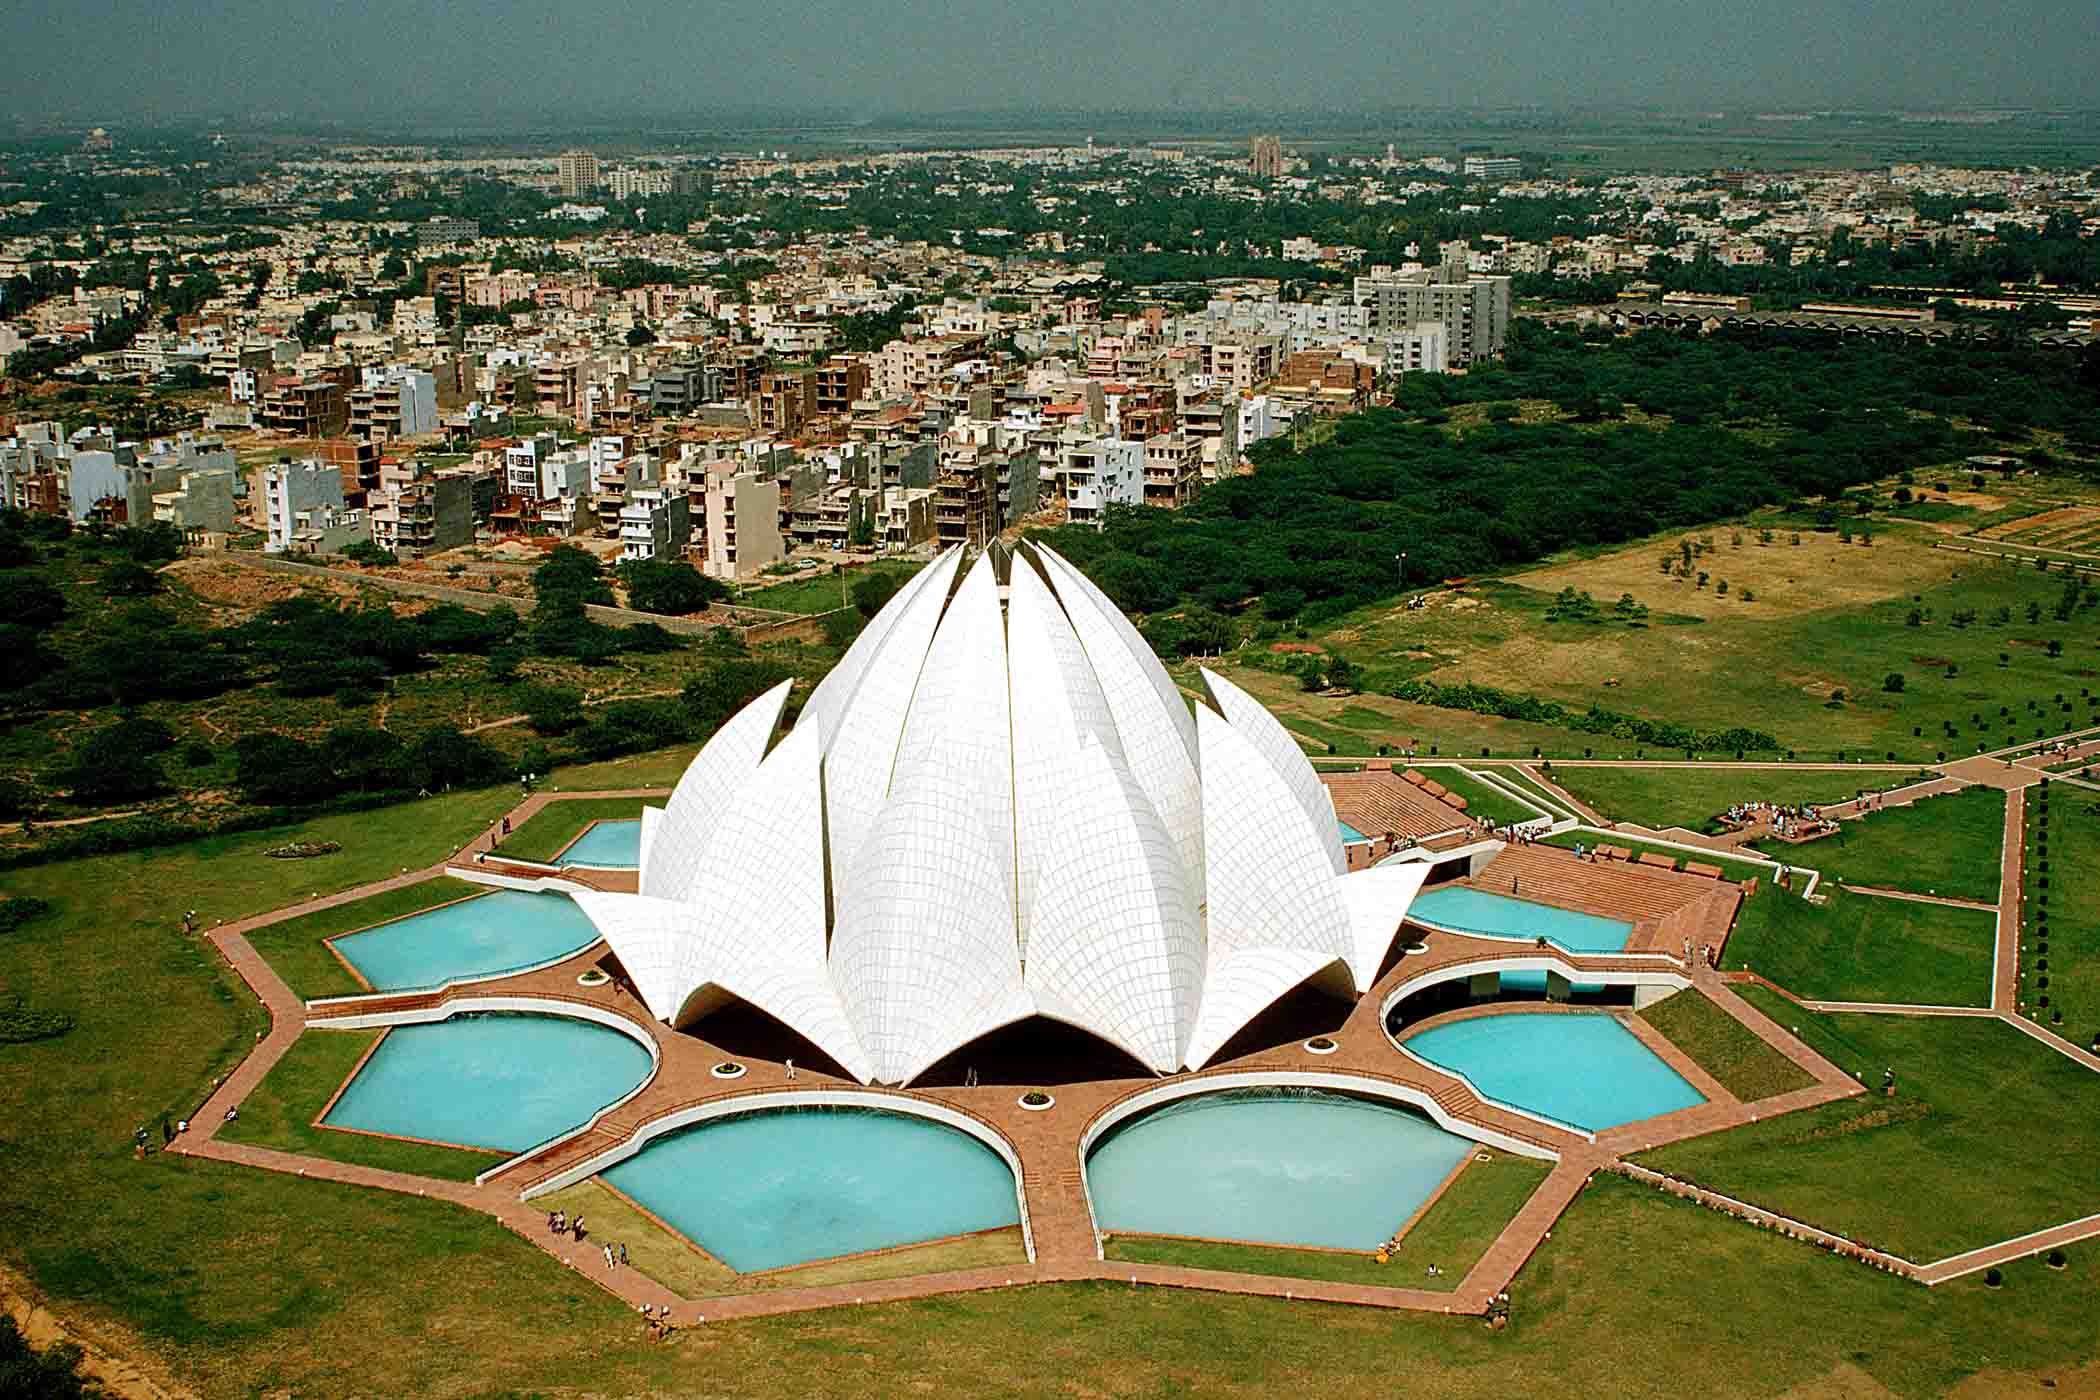 Lotus Temple | Series 'The most iconic temples in the world